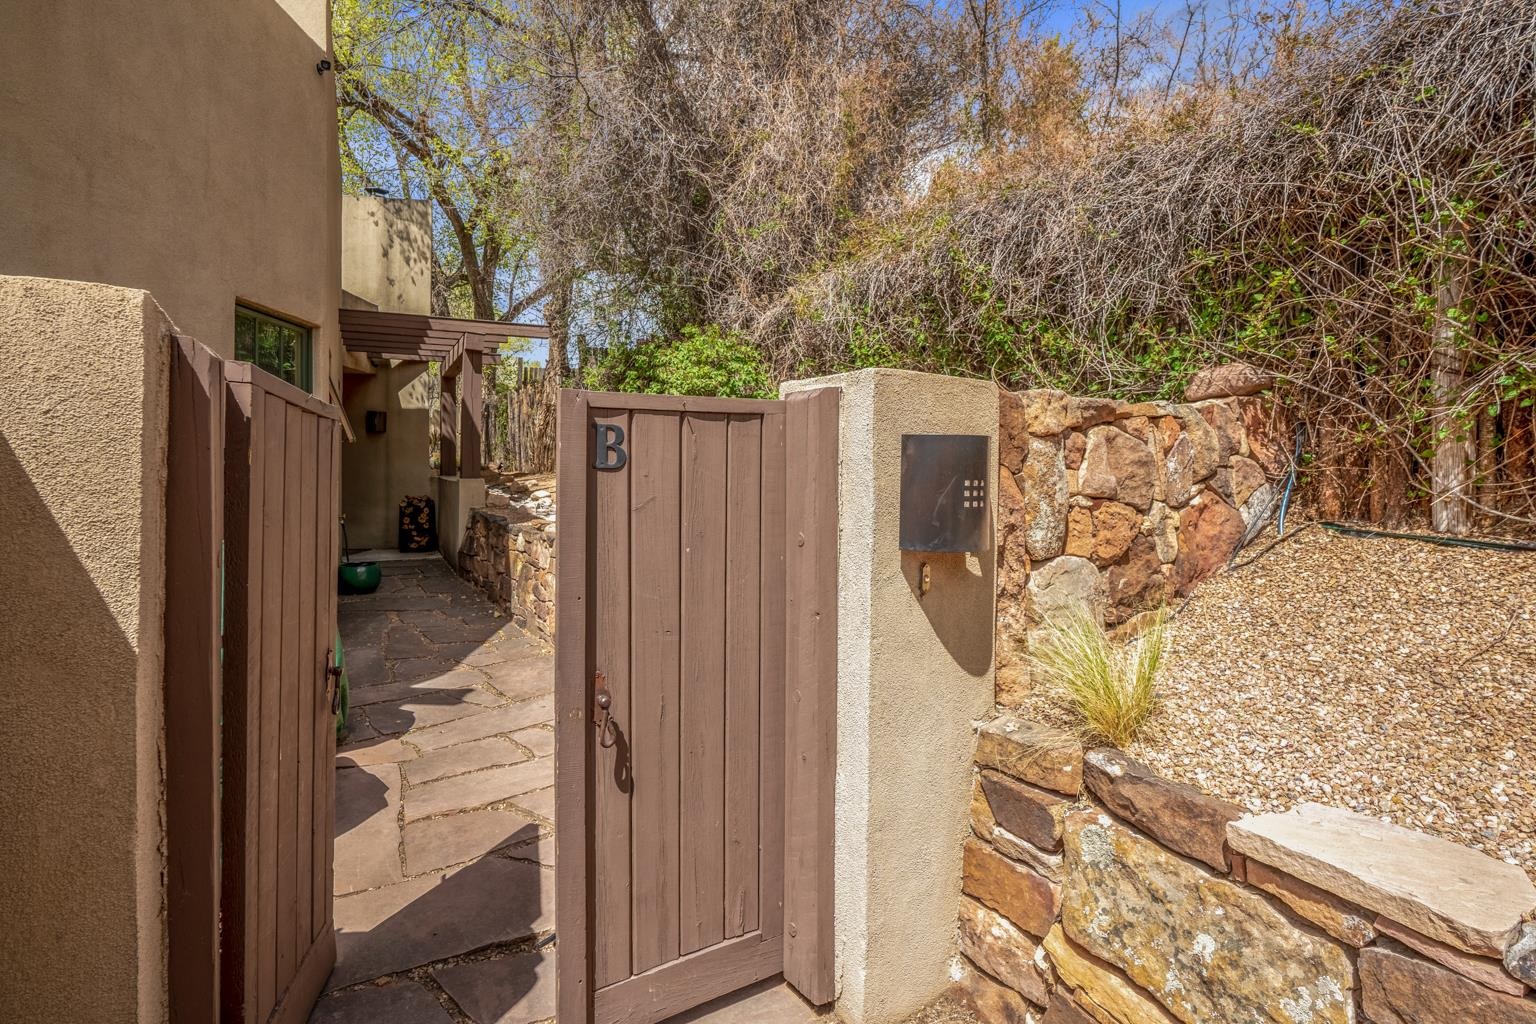 531 Dolores St Unit B, Santa Fe, New Mexico 87501, 2 Bedrooms Bedrooms, ,2 BathroomsBathrooms,Residential,For Sale,531 Dolores St Unit B,202201338